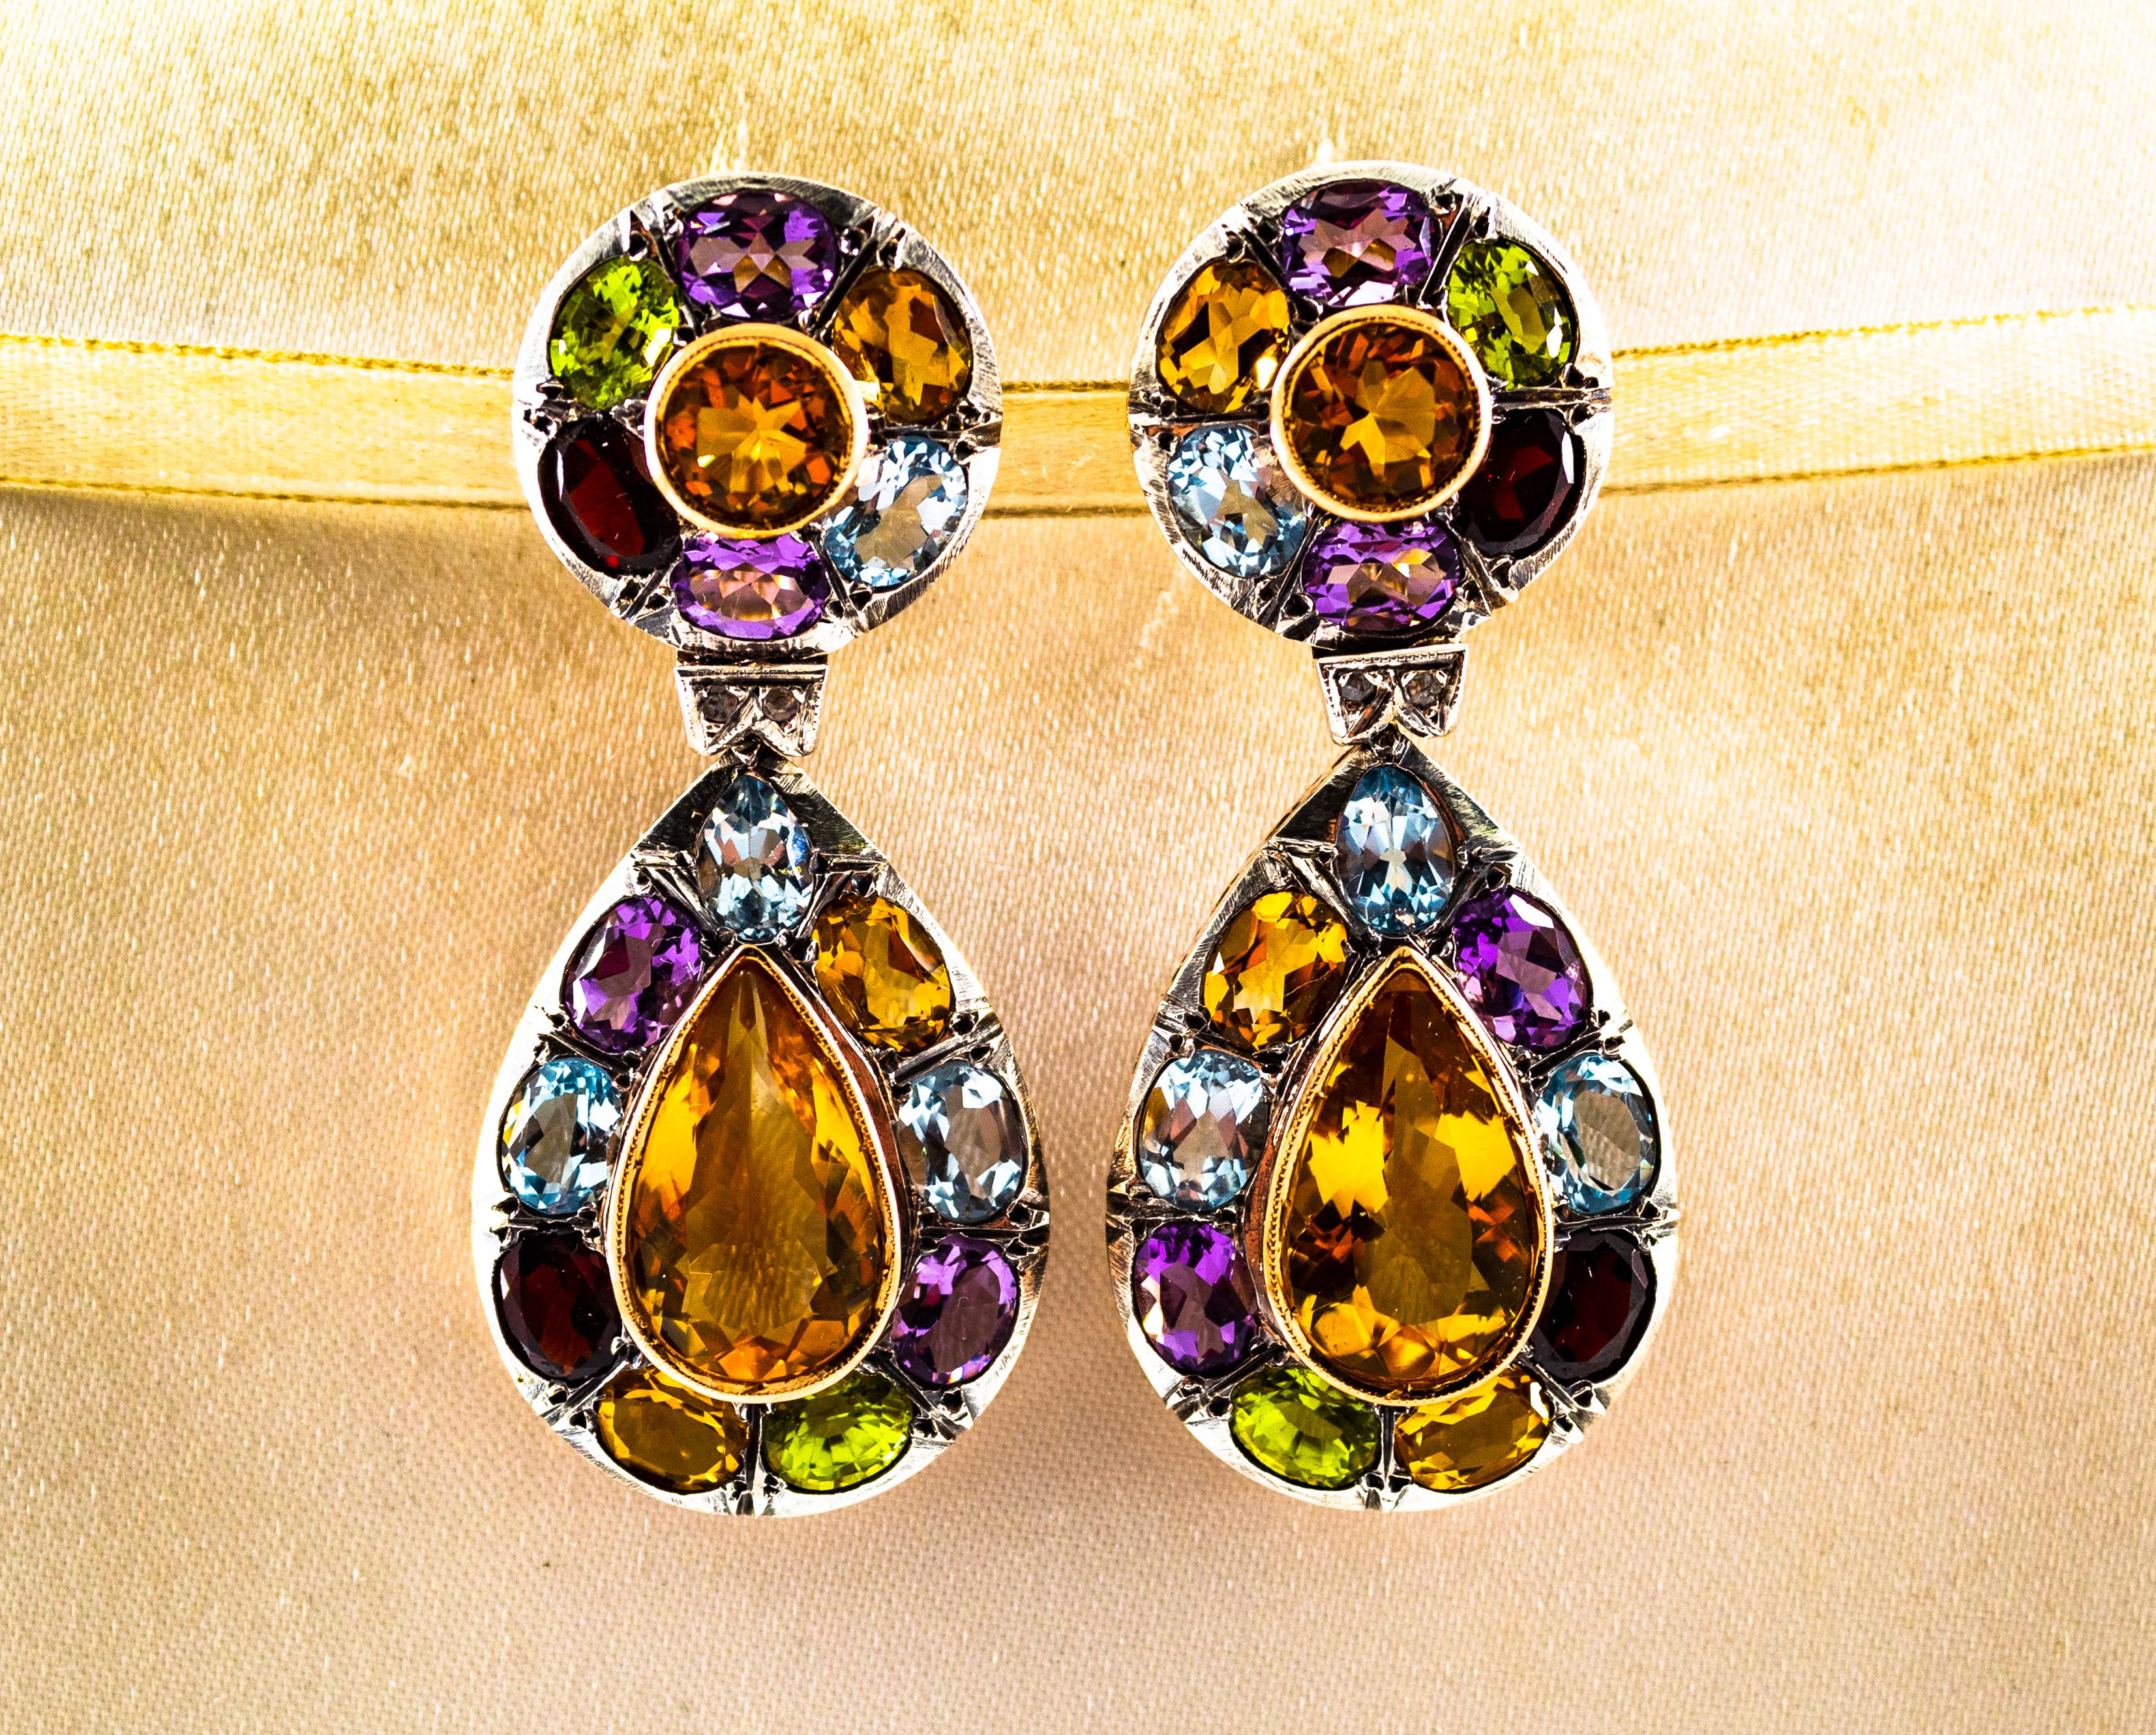 These Earrings are made of 9K Yellow Gold and Sterling Silver.
These Earrings have 0.05 Carats of White Rose Cut Diamonds.
These Earrings have also Blue Topaz, Amethyst, Citrine, Garnet and Peridot.
All our Earrings have pins for pierced ears but we